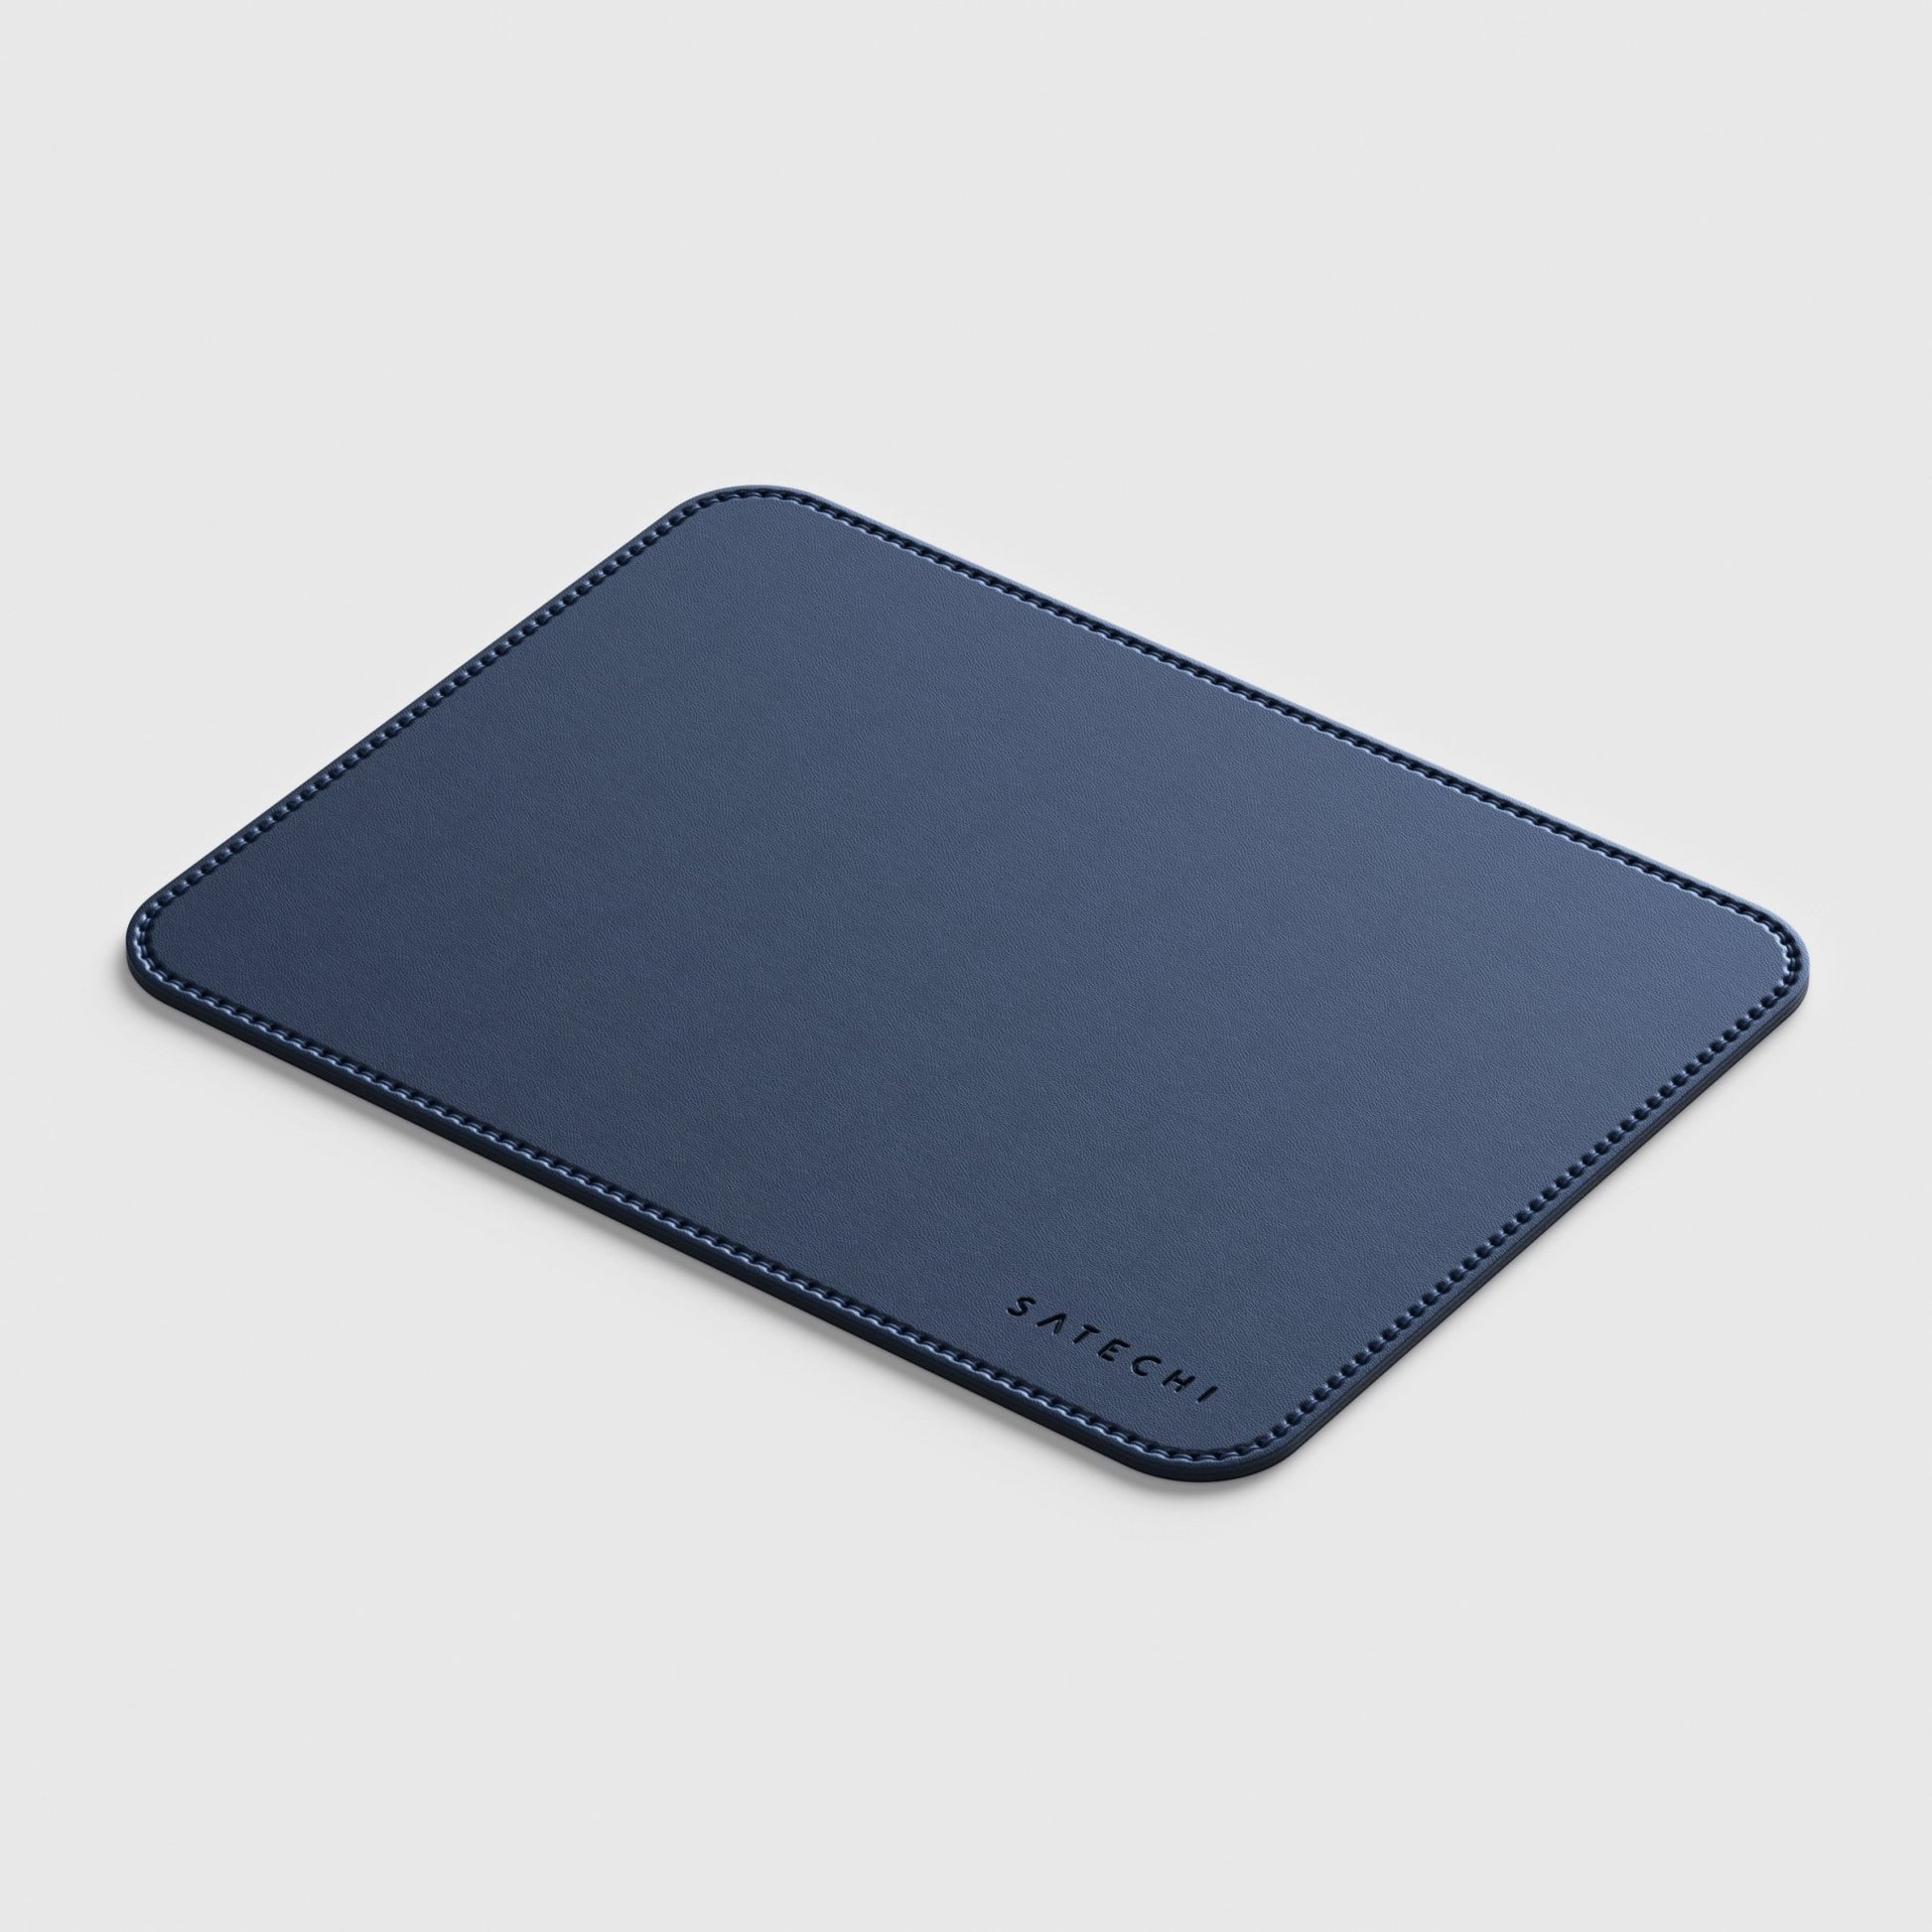 Satechi Eco-Leather Mouse Pad-Goodnotes.no